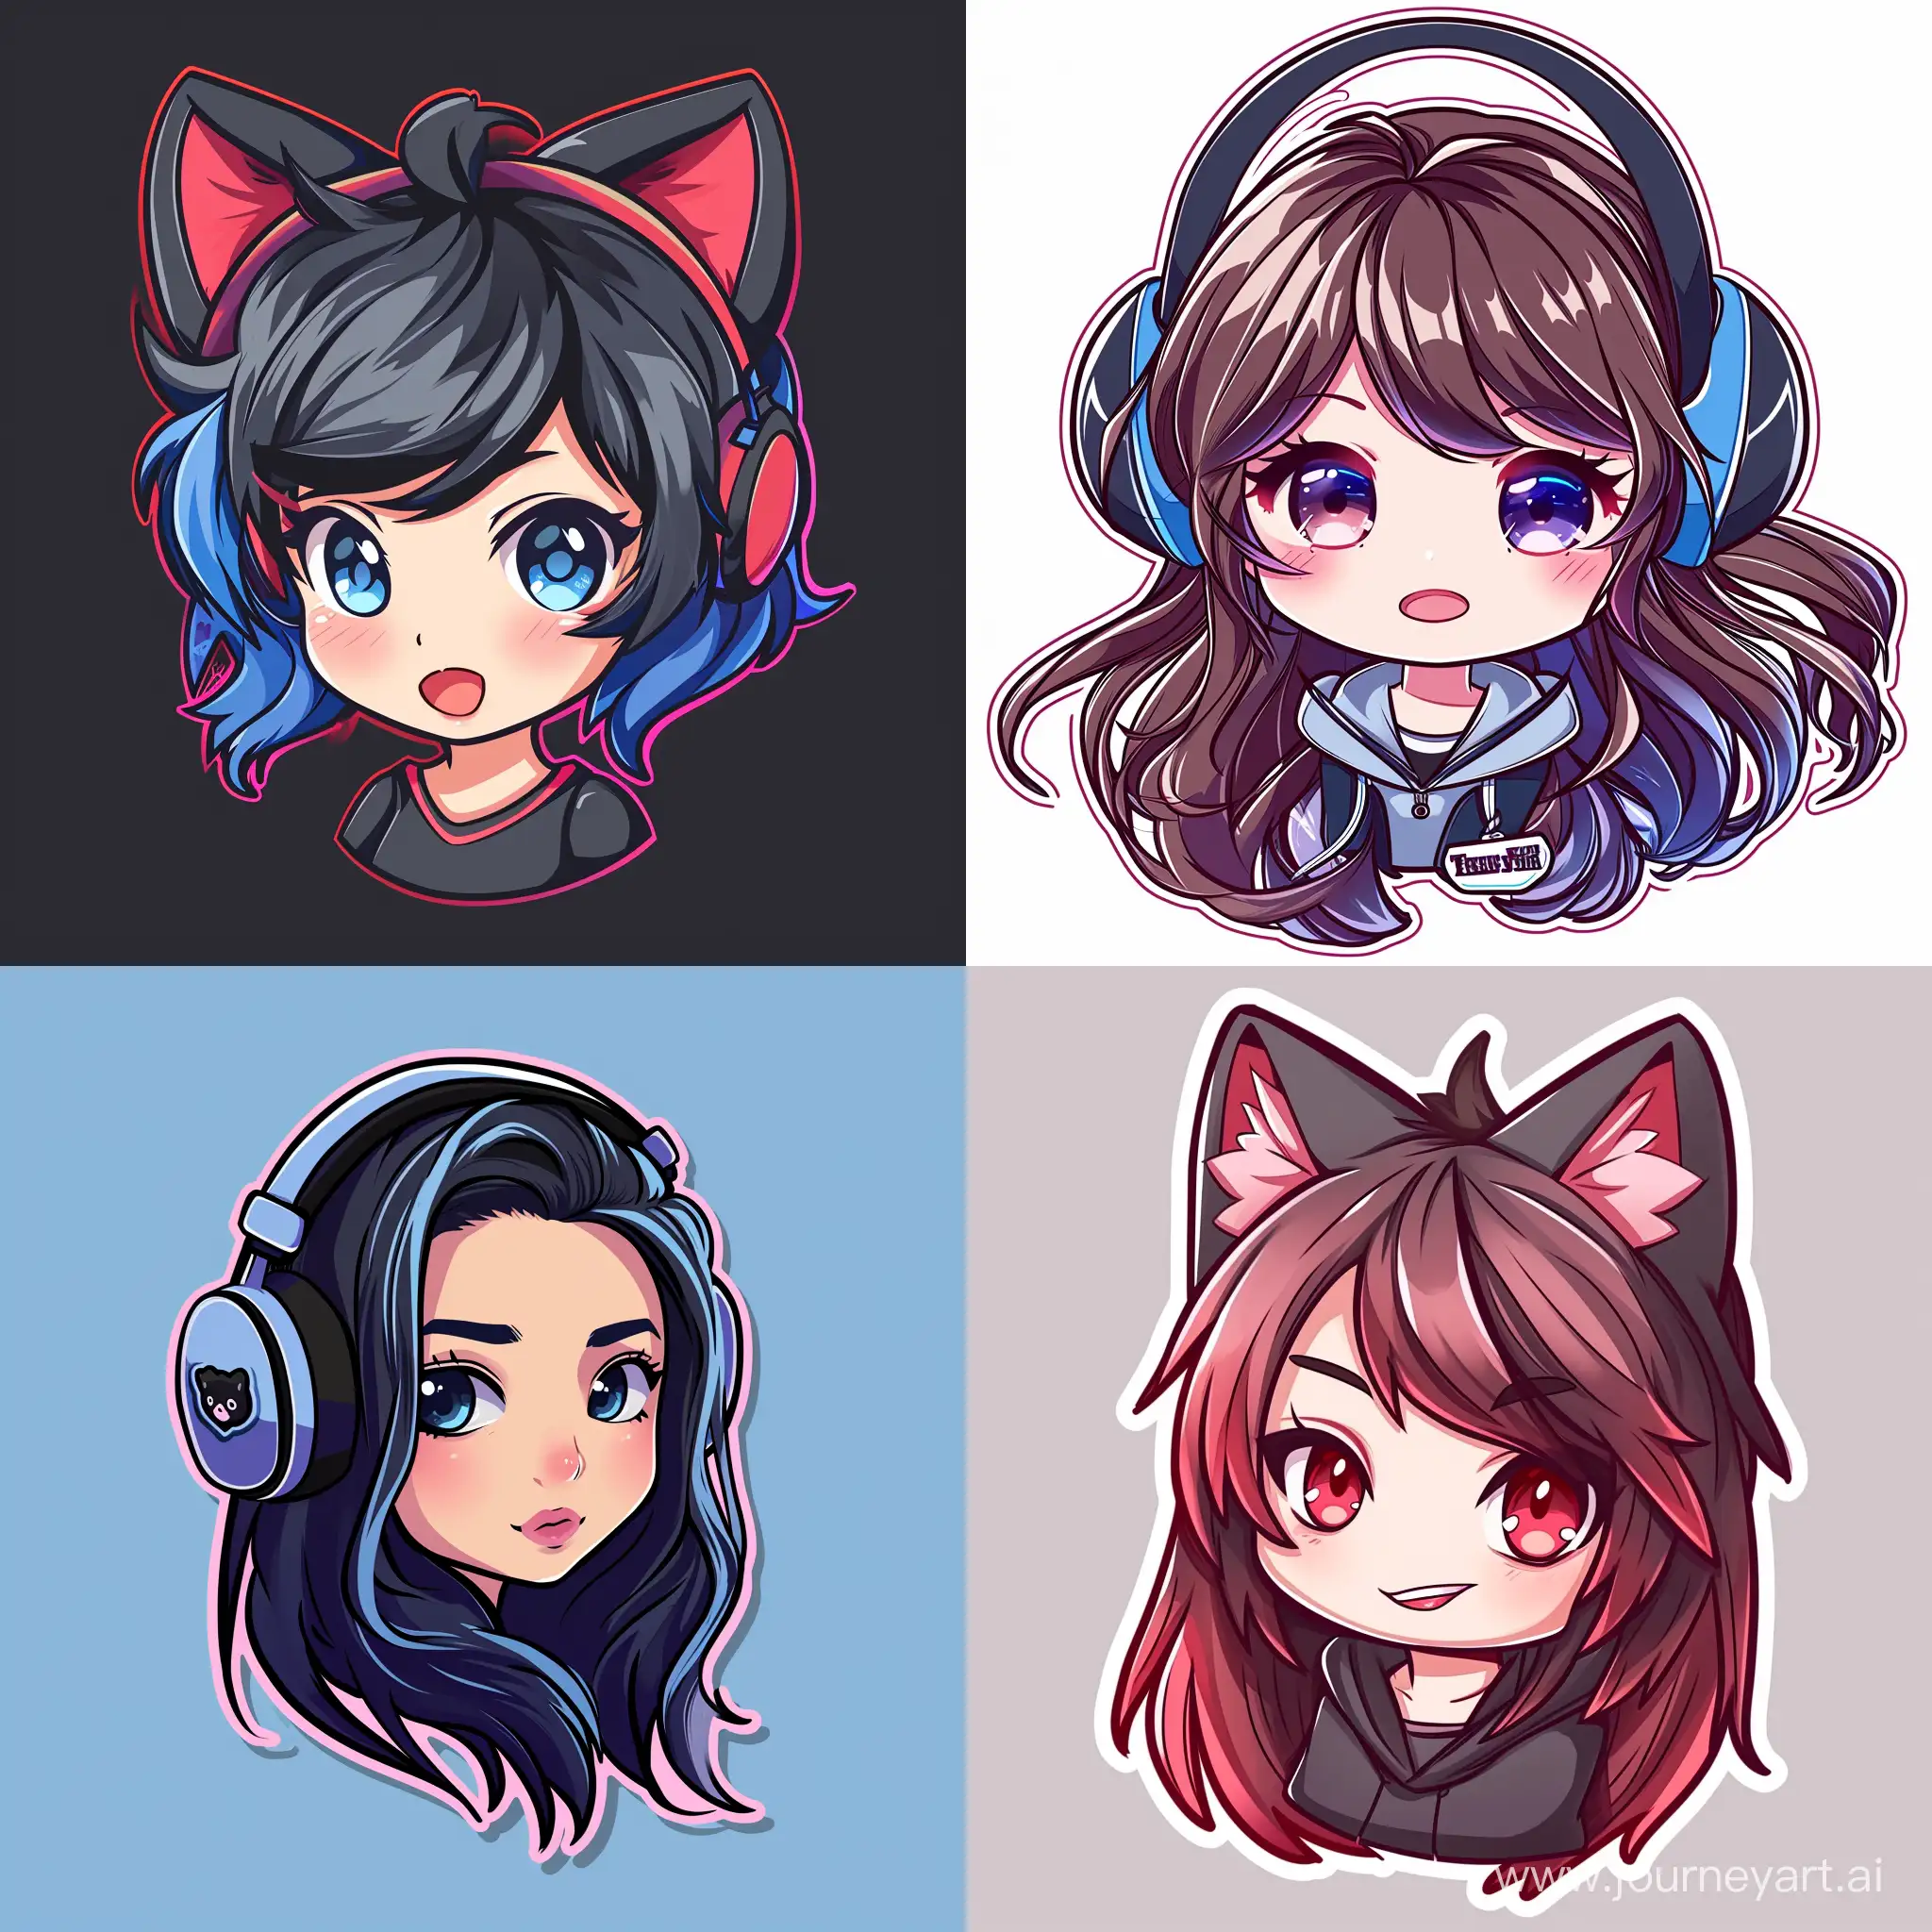 Cute-Anime-Chibi-Twitch-Emotes-and-Badges-Design